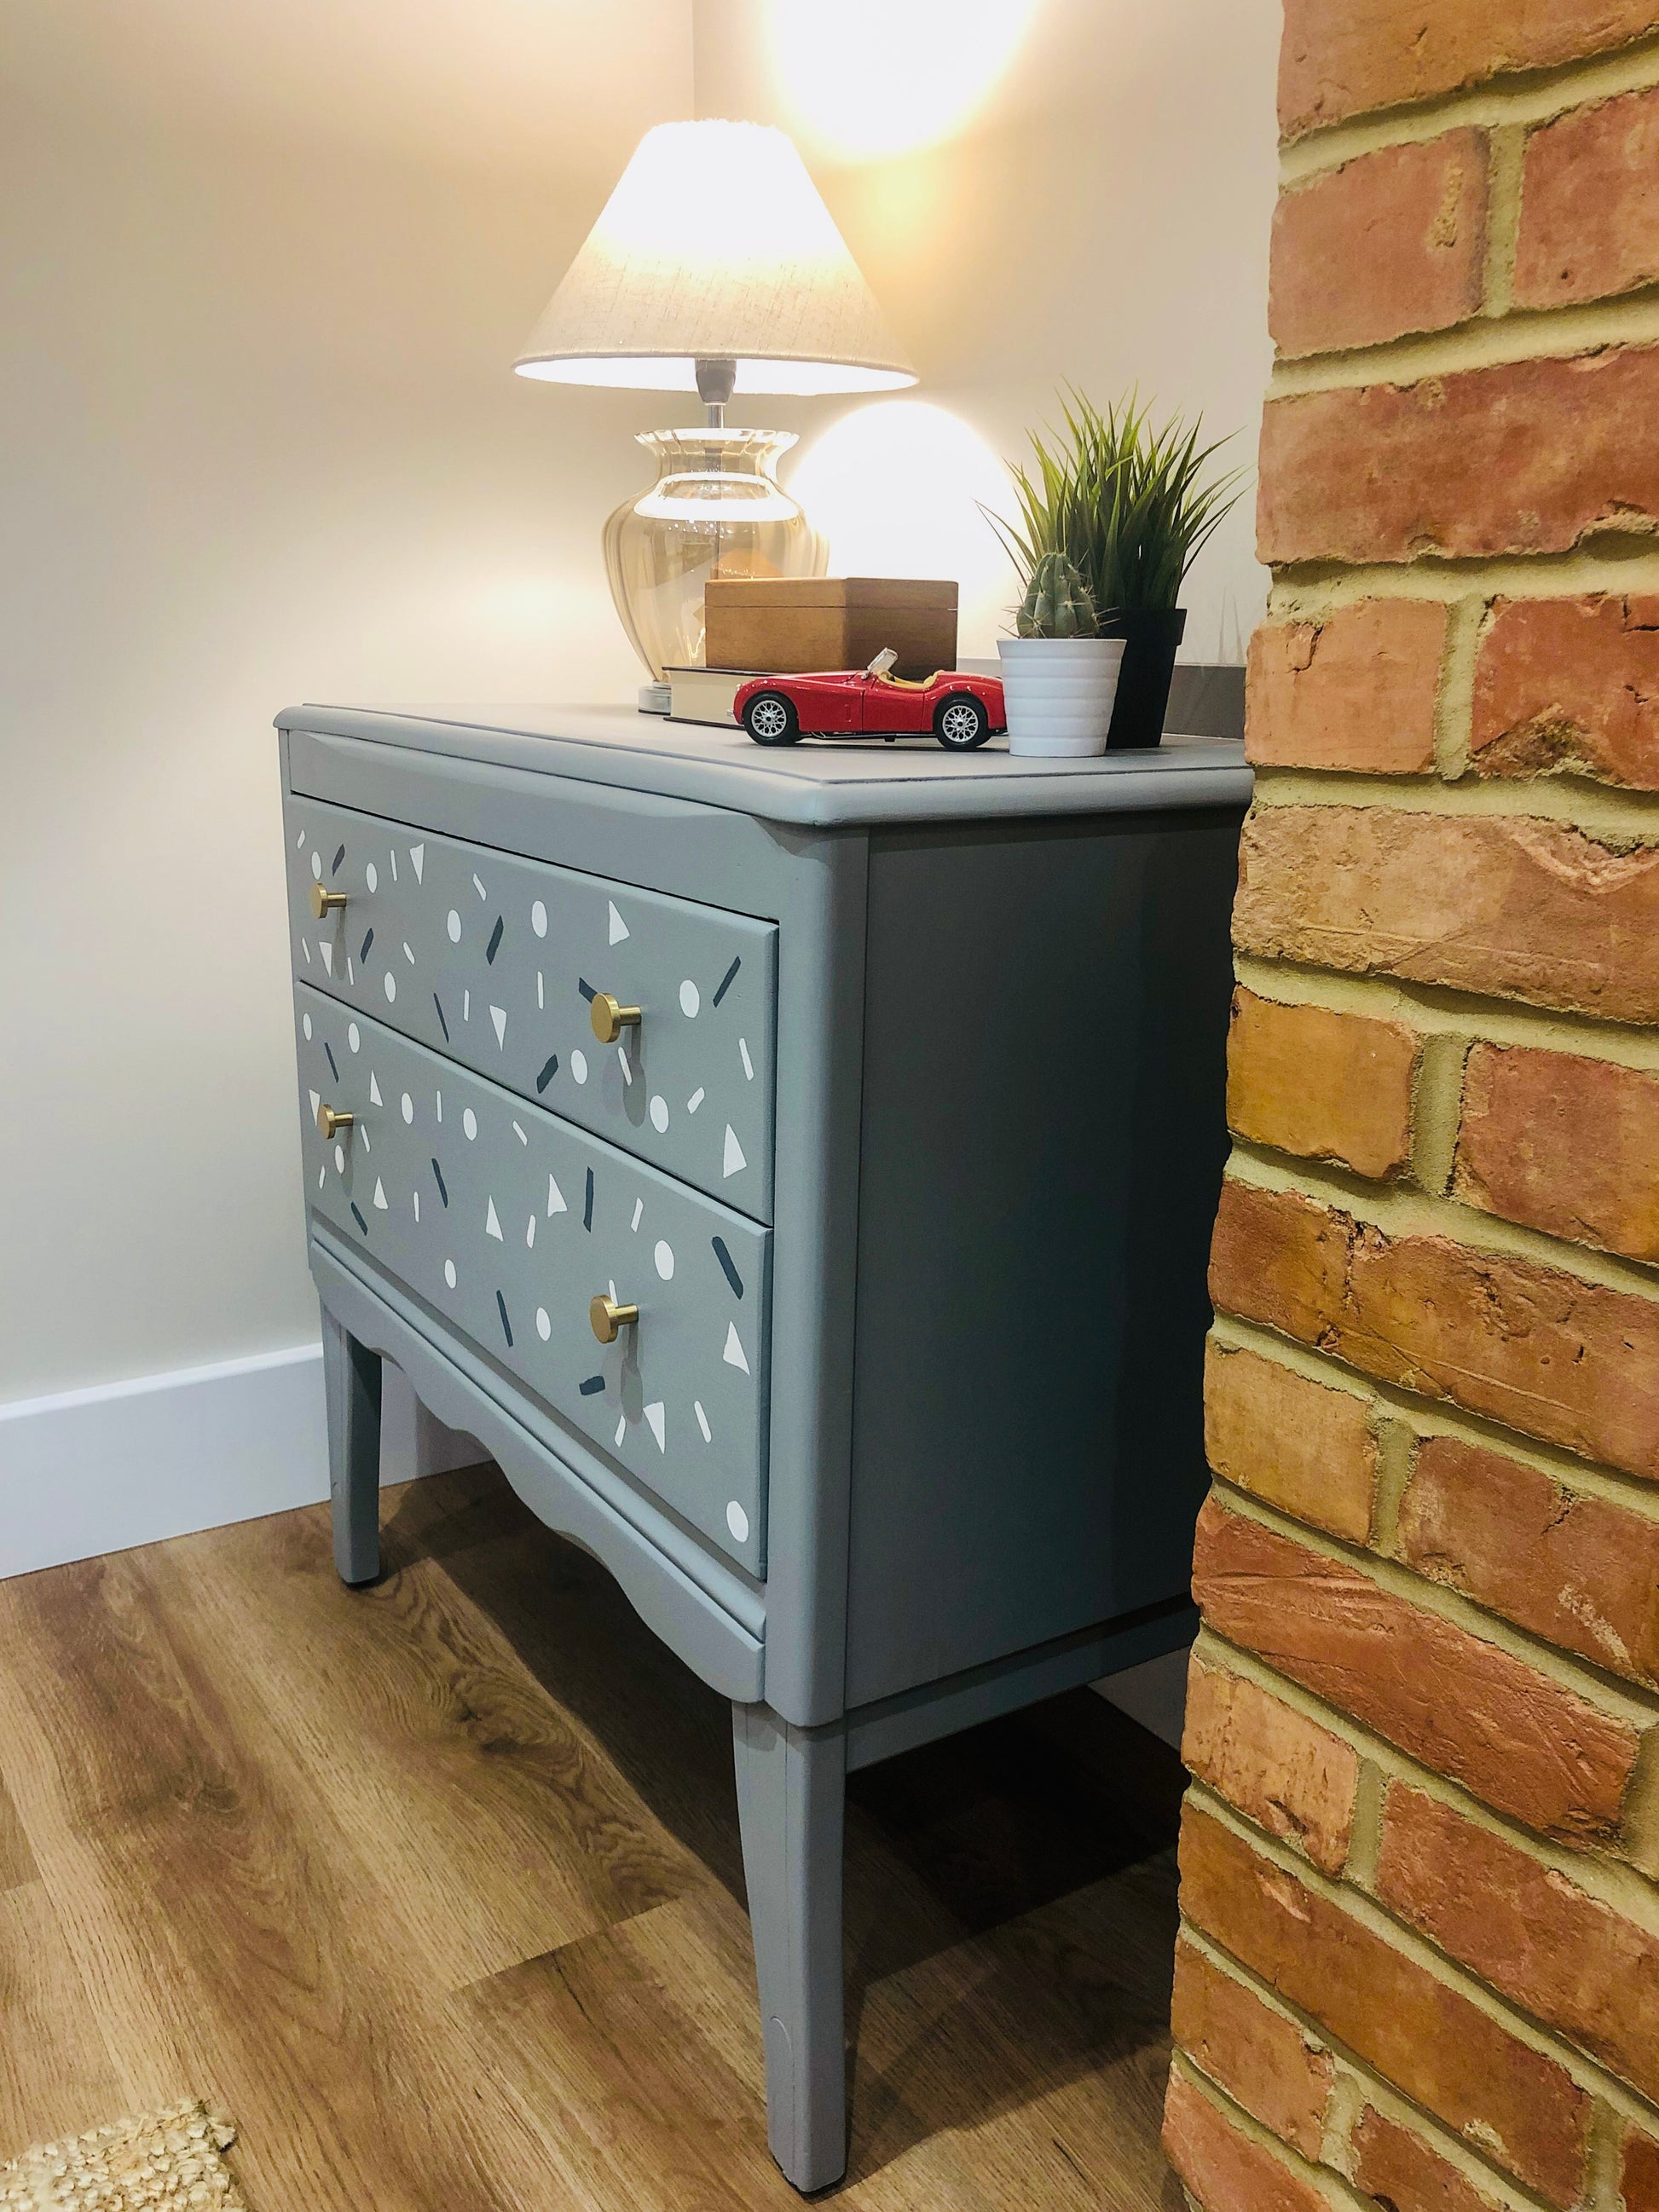 Small Harris Lebus chest of drawers in grey with small shapes painted on the drawers